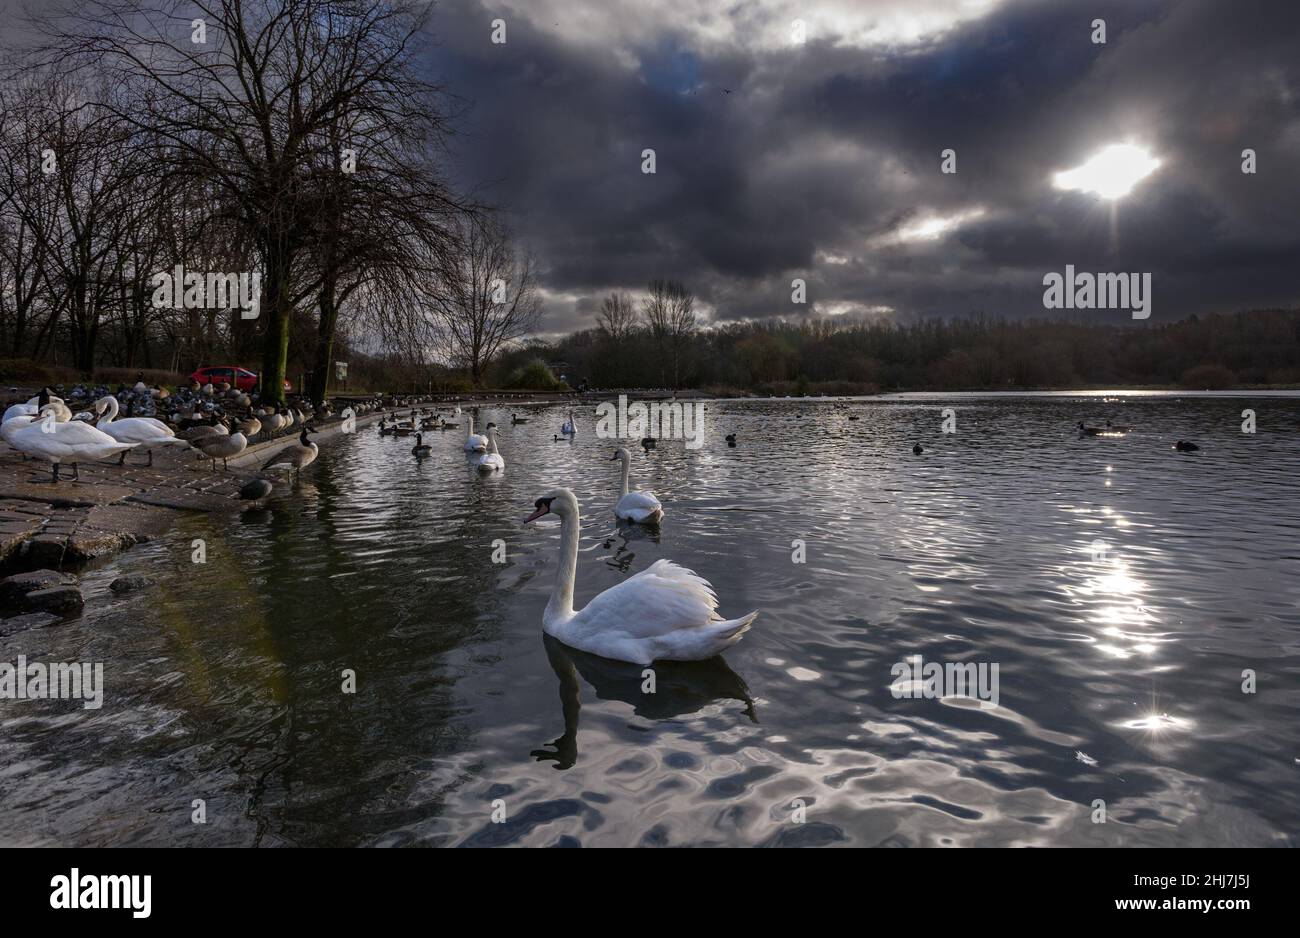 Bolton, Lancashire, UK, Thursday January 27, 2022. A beautiful sunny winter morning for the swans and other wildlife at Moses Gate Country Park, Bolton. Credit: Paul Heyes/Alamy News Live Stock Photo